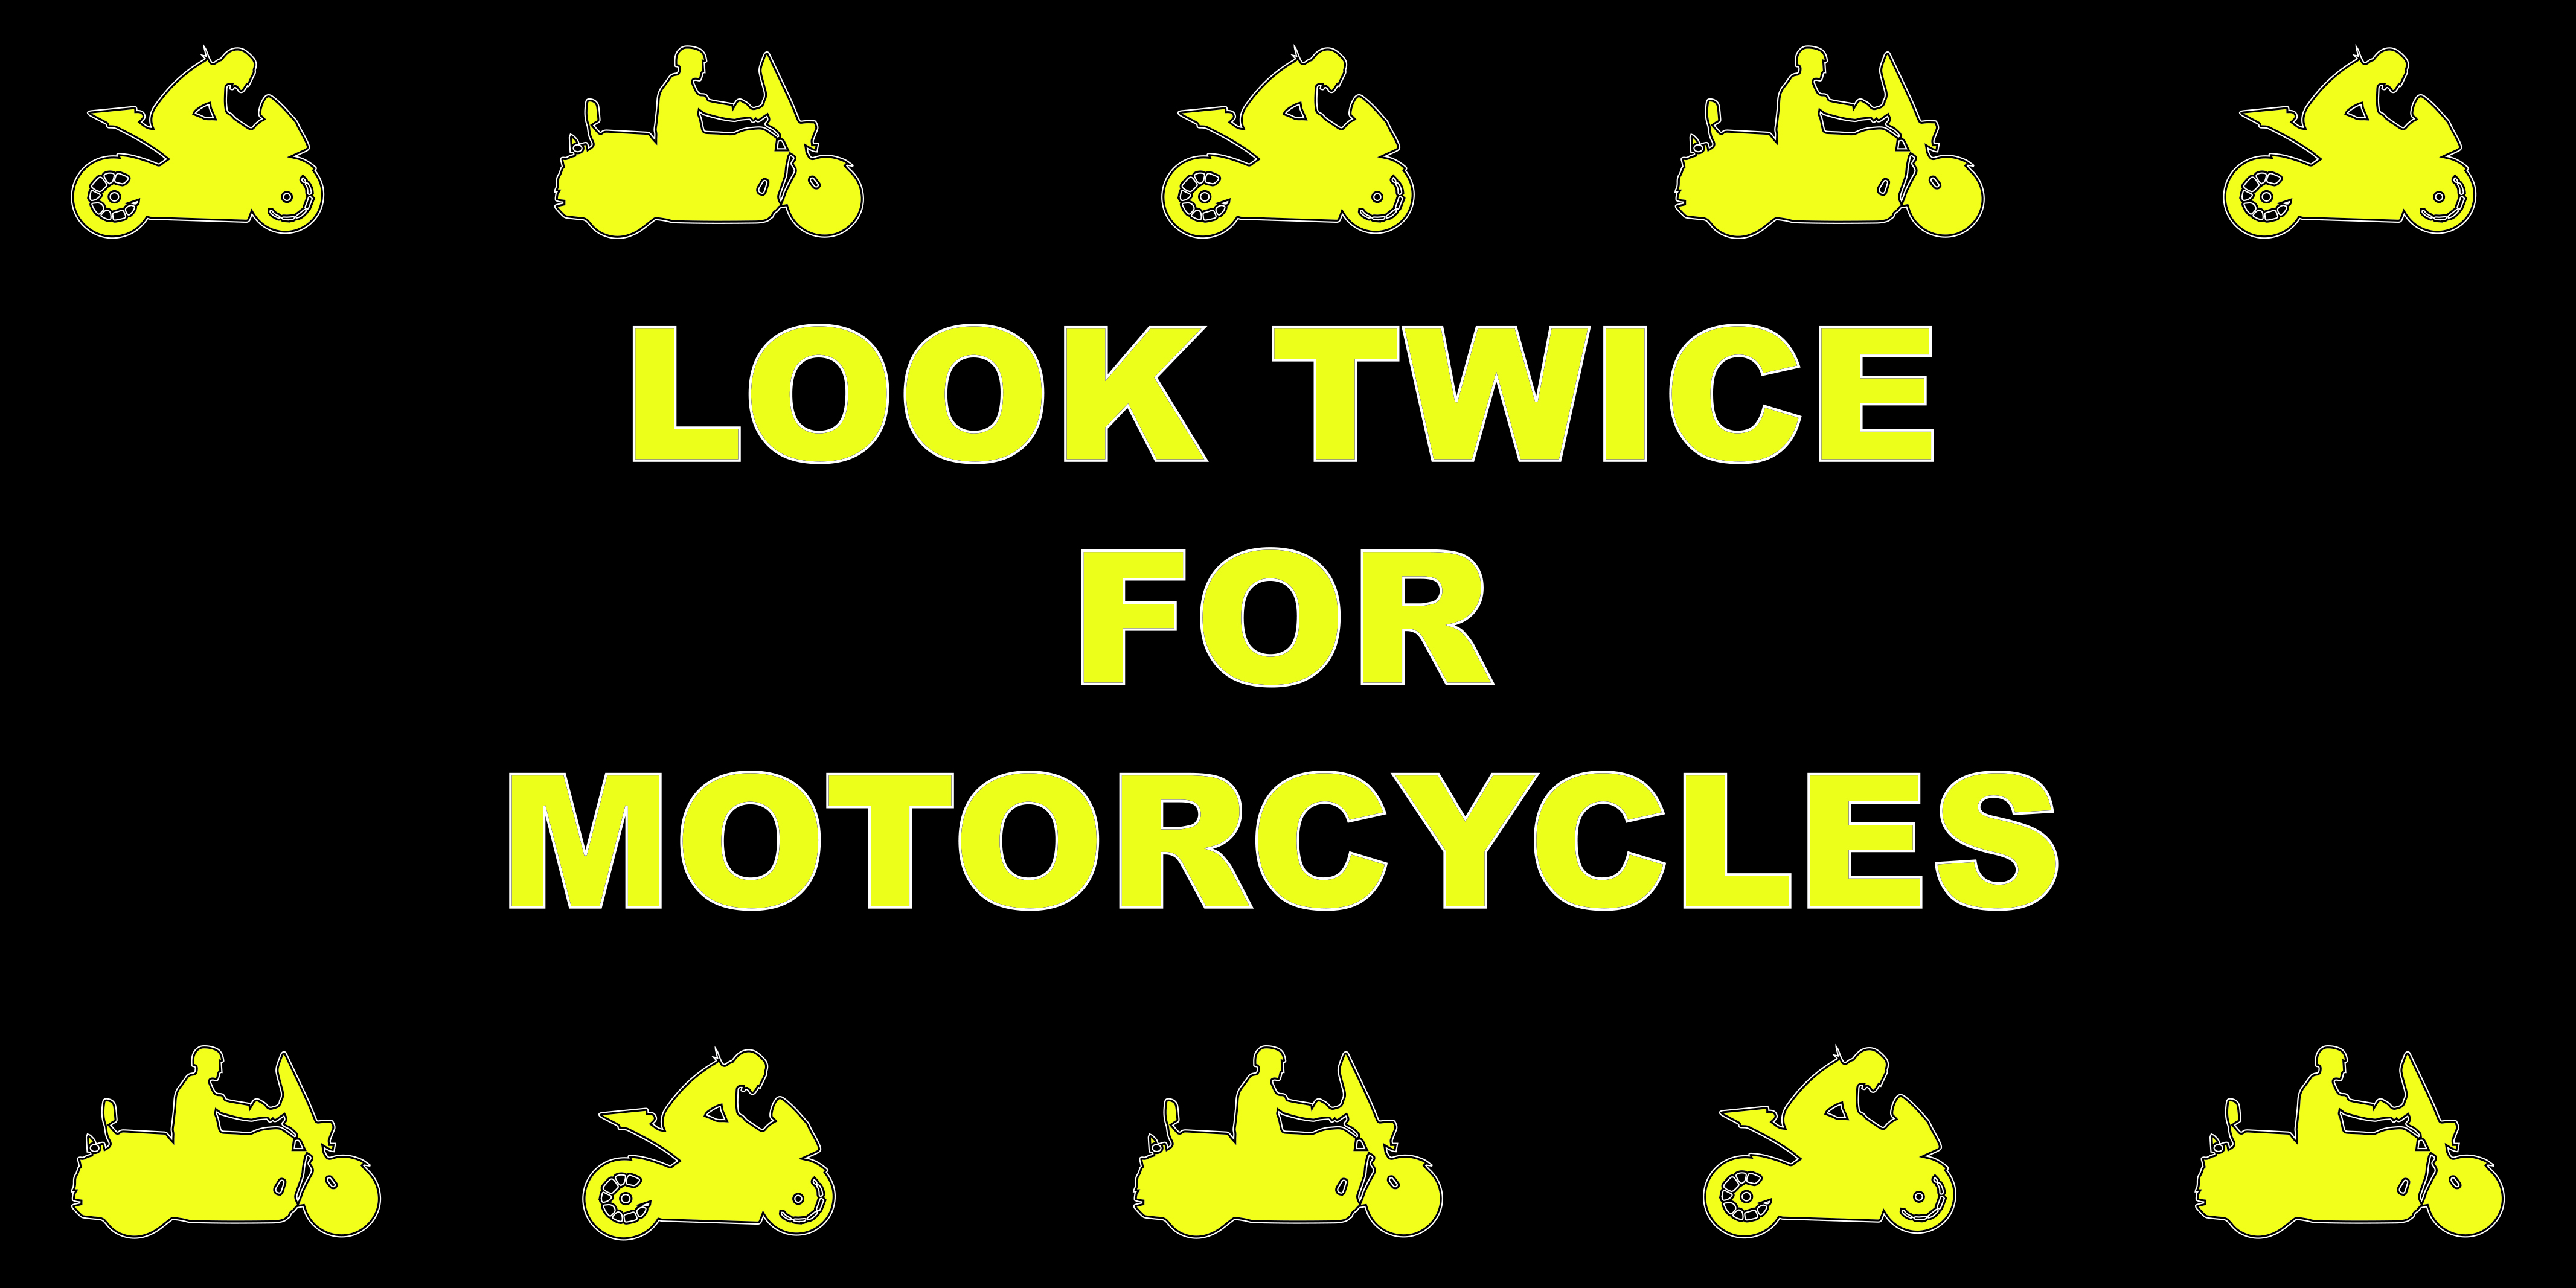 Silhouettes of motorcycles with the message Look twice for motorcycles